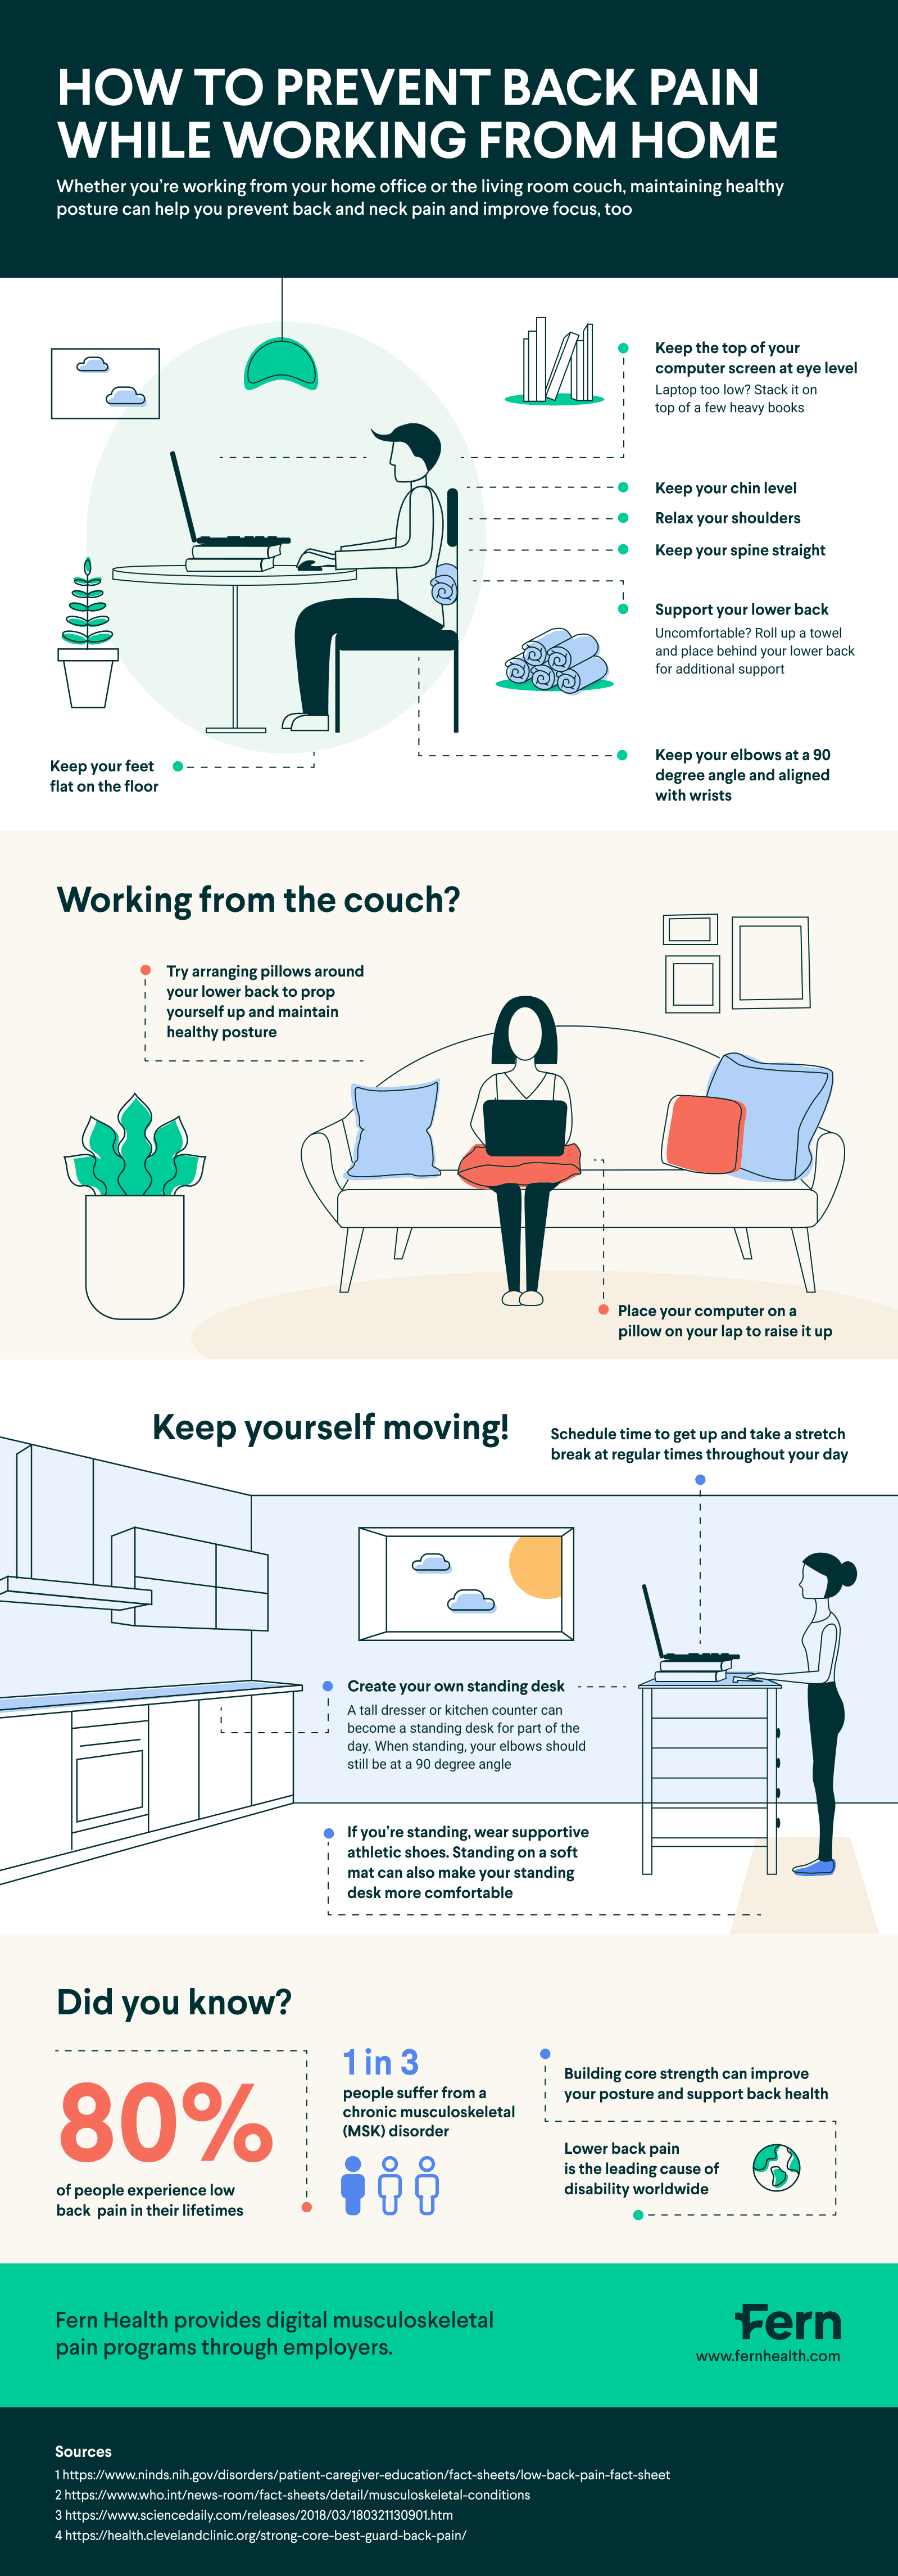 How to prevent back pain while working from home infographic